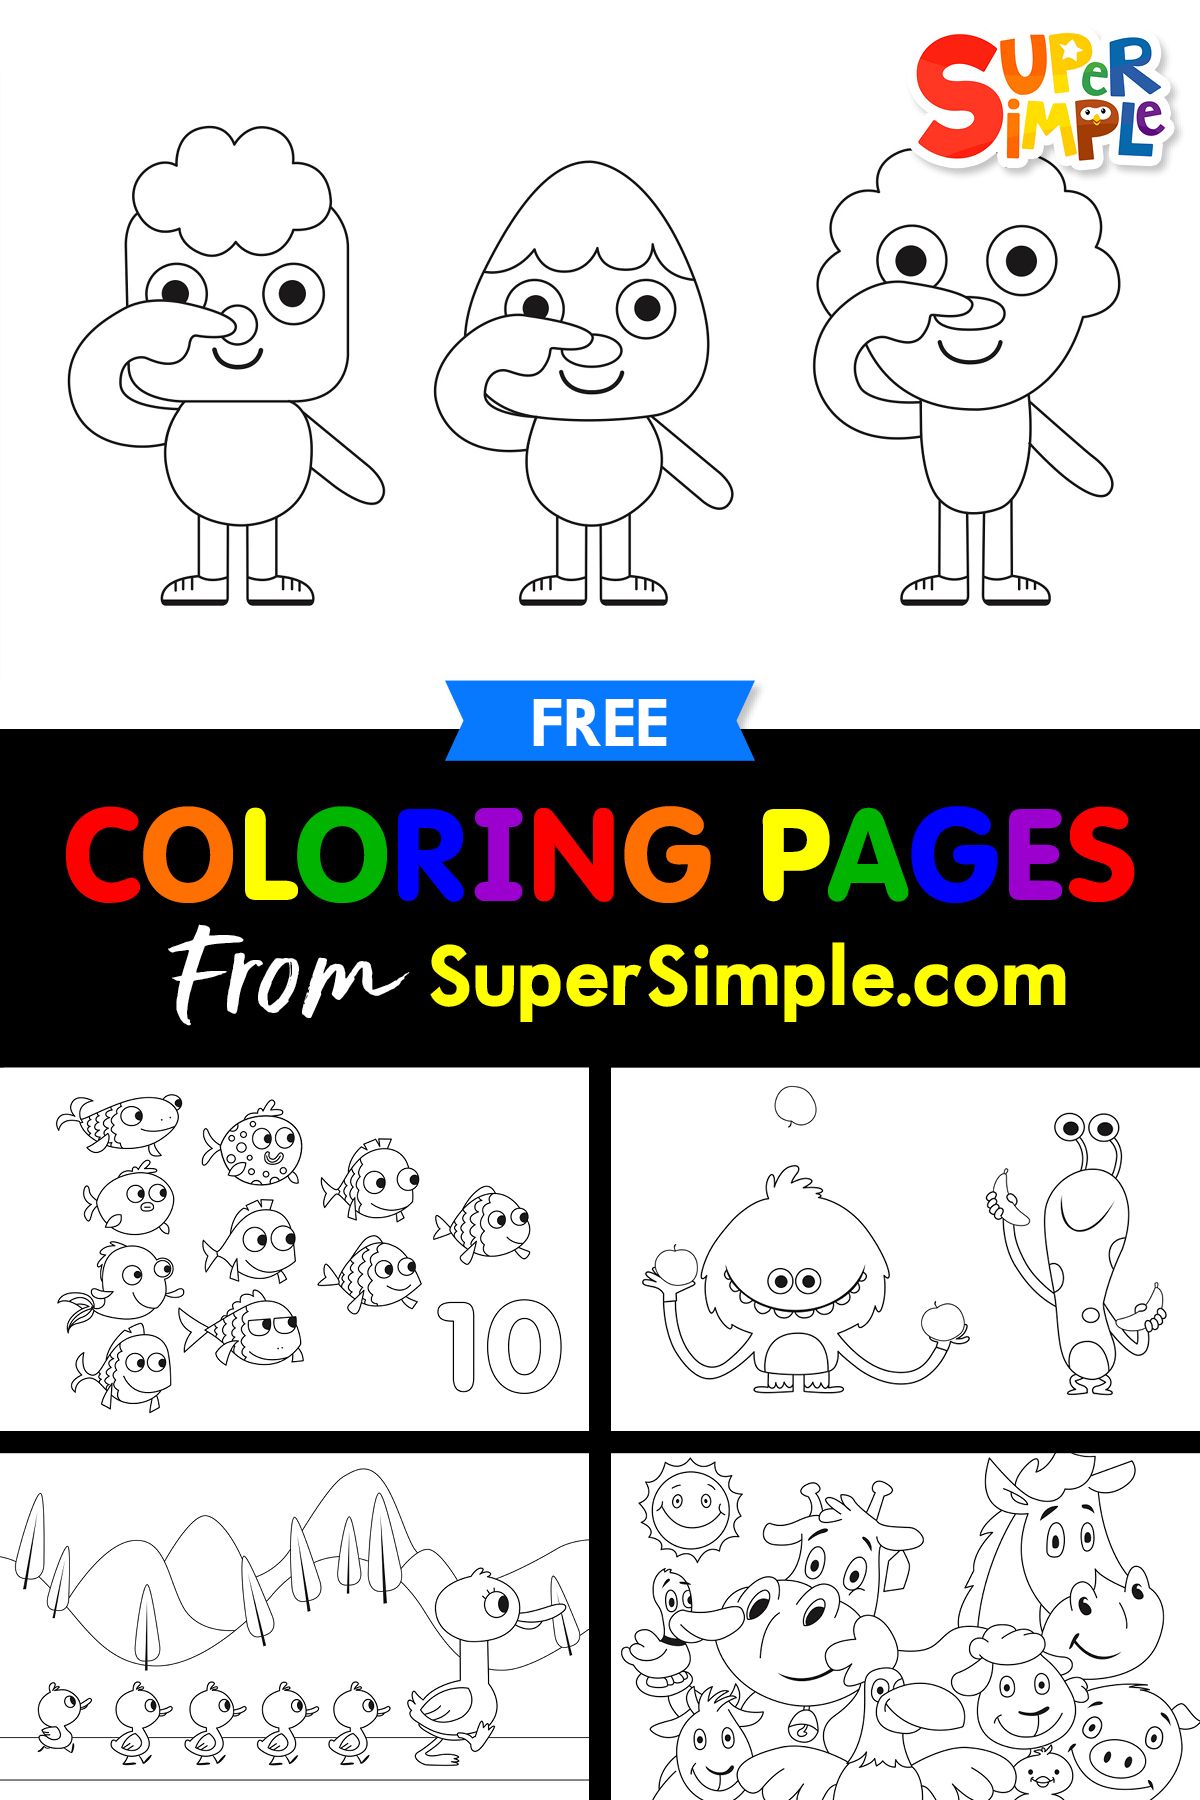 Coloring pages super simple songs toddler learning activities coloring pages